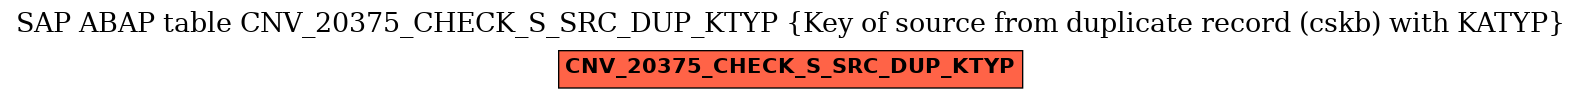 E-R Diagram for table CNV_20375_CHECK_S_SRC_DUP_KTYP (Key of source from duplicate record (cskb) with KATYP)